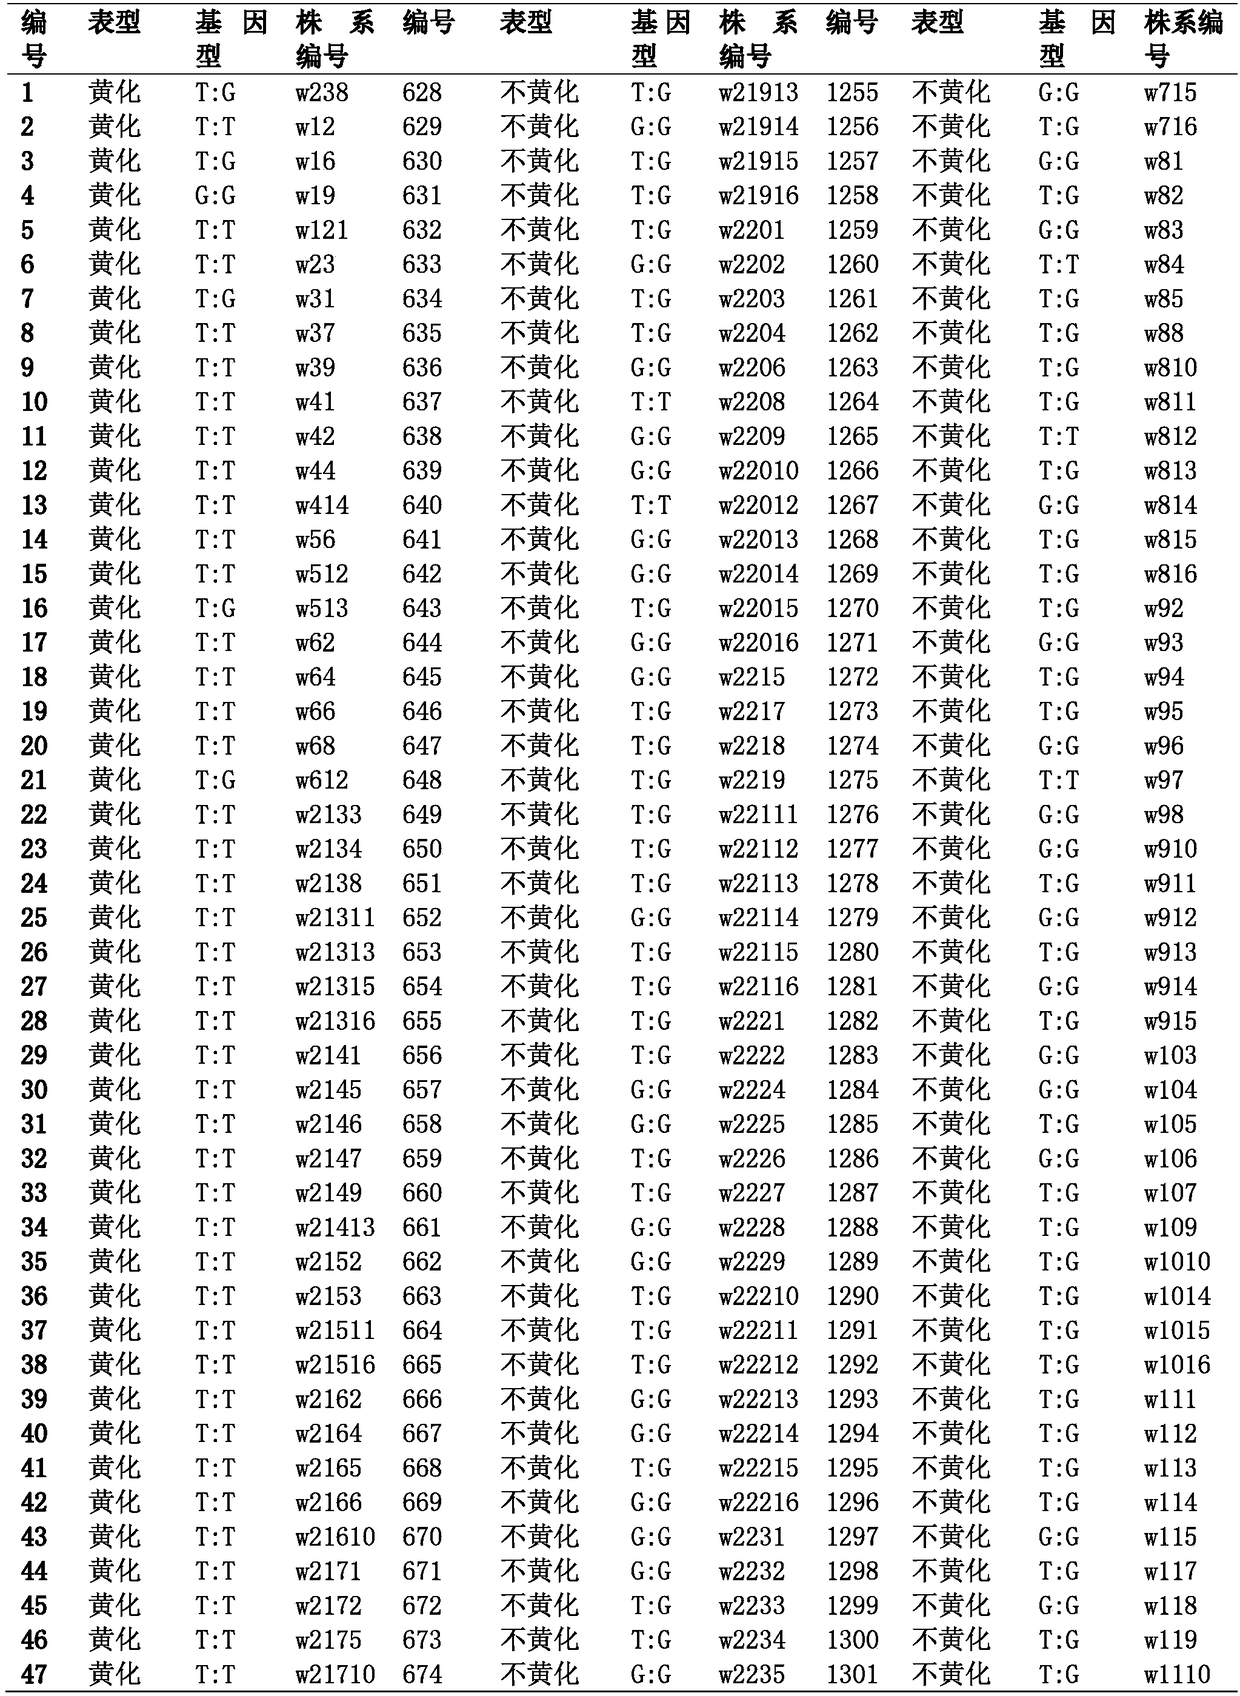 SNP molecular marker for identifying and controlling formation of low-temperature yellowing property of Chinese cabbage leaves and application thereof